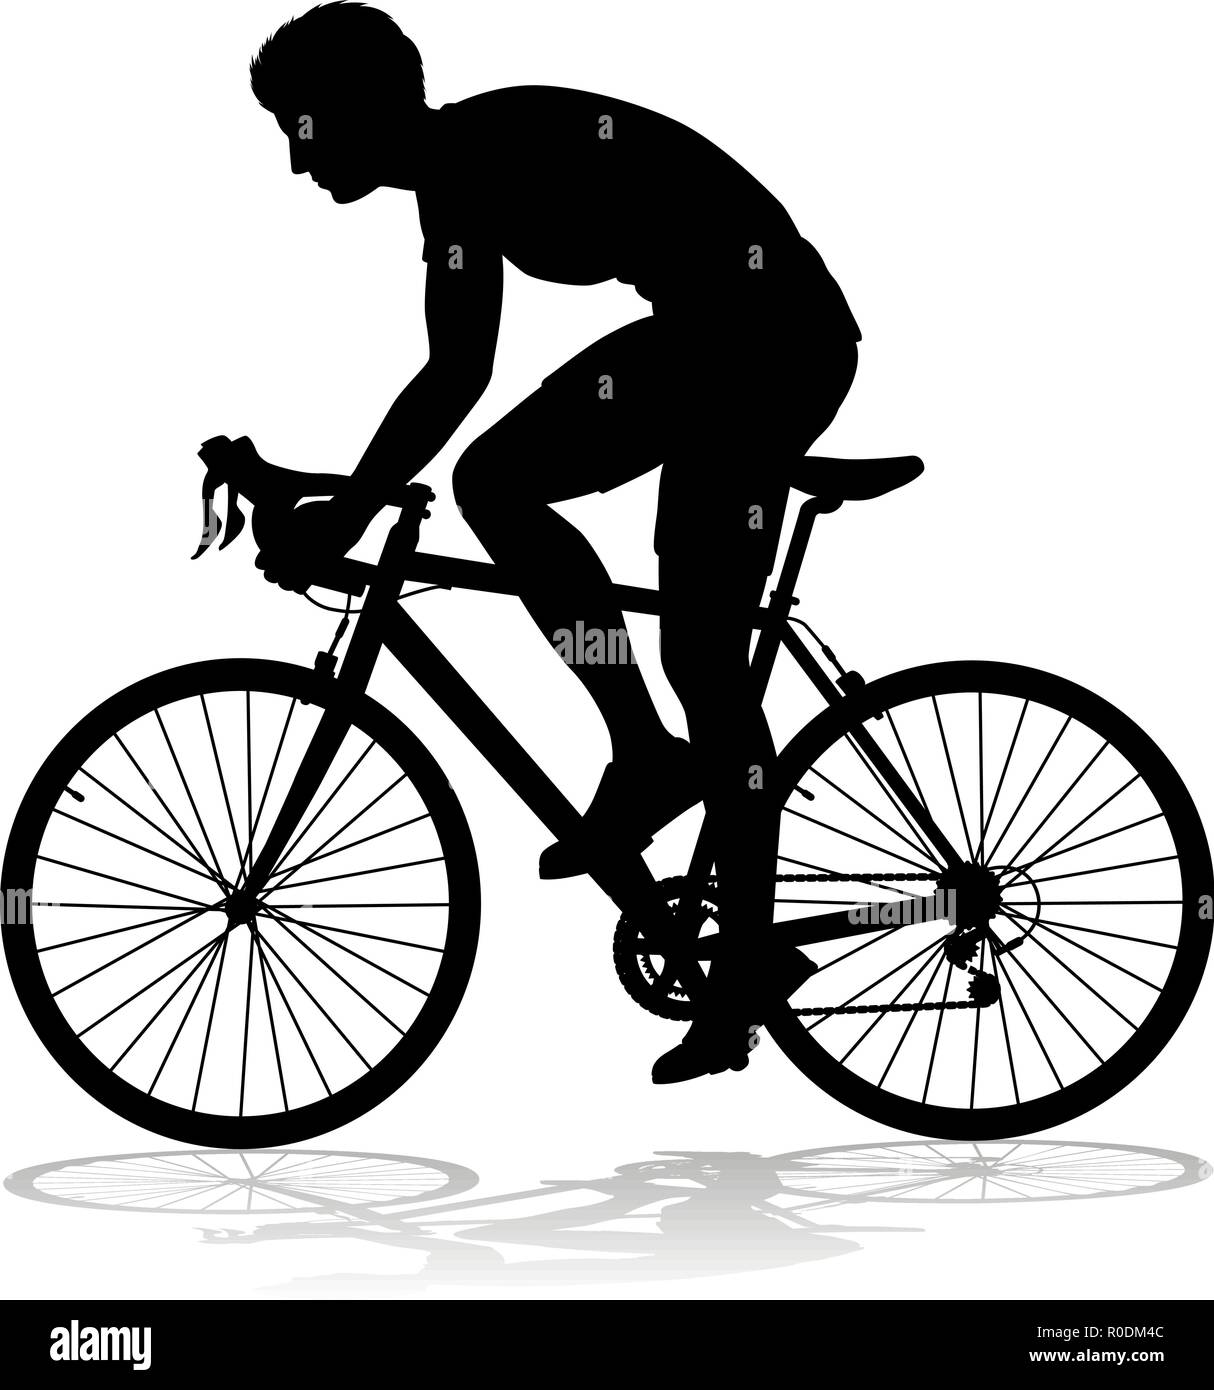 Bike Cyclist Riding Bicycle Silhouette Stock Vector